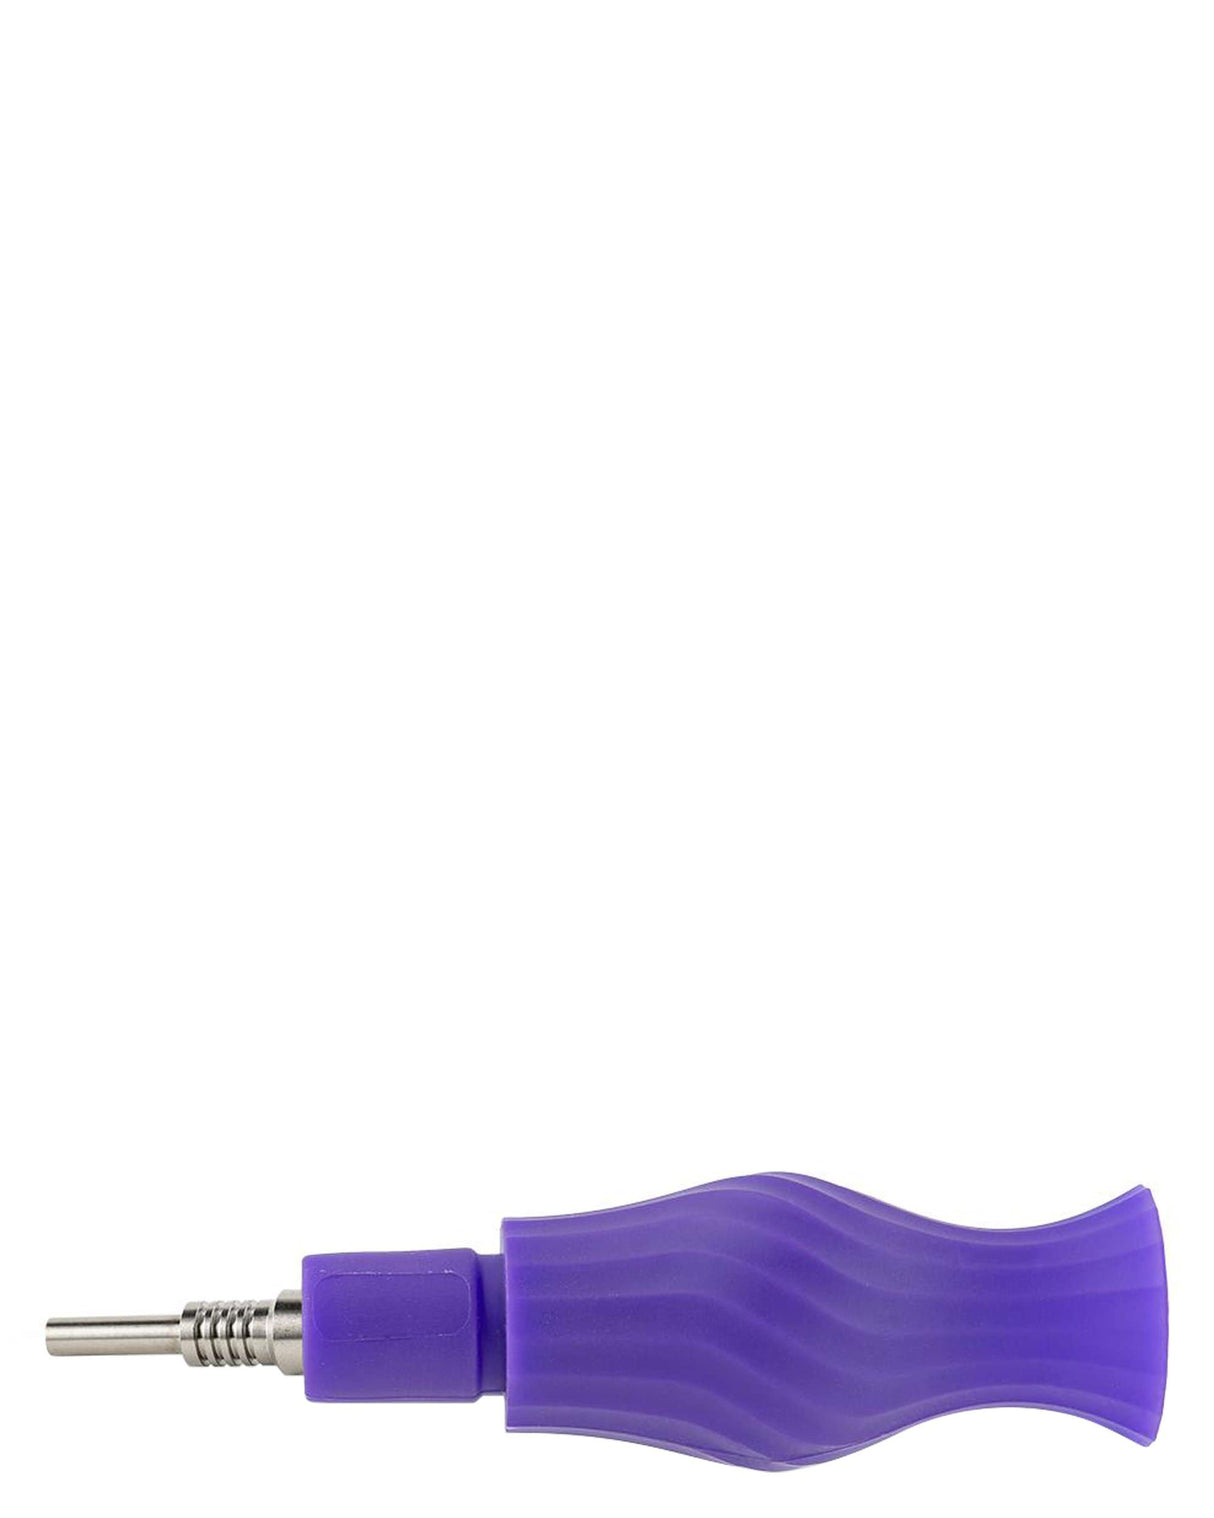 Ooze Echo Silicone Bong in Purple with Slitted Percolator and Borosilicate Downstem - Side View